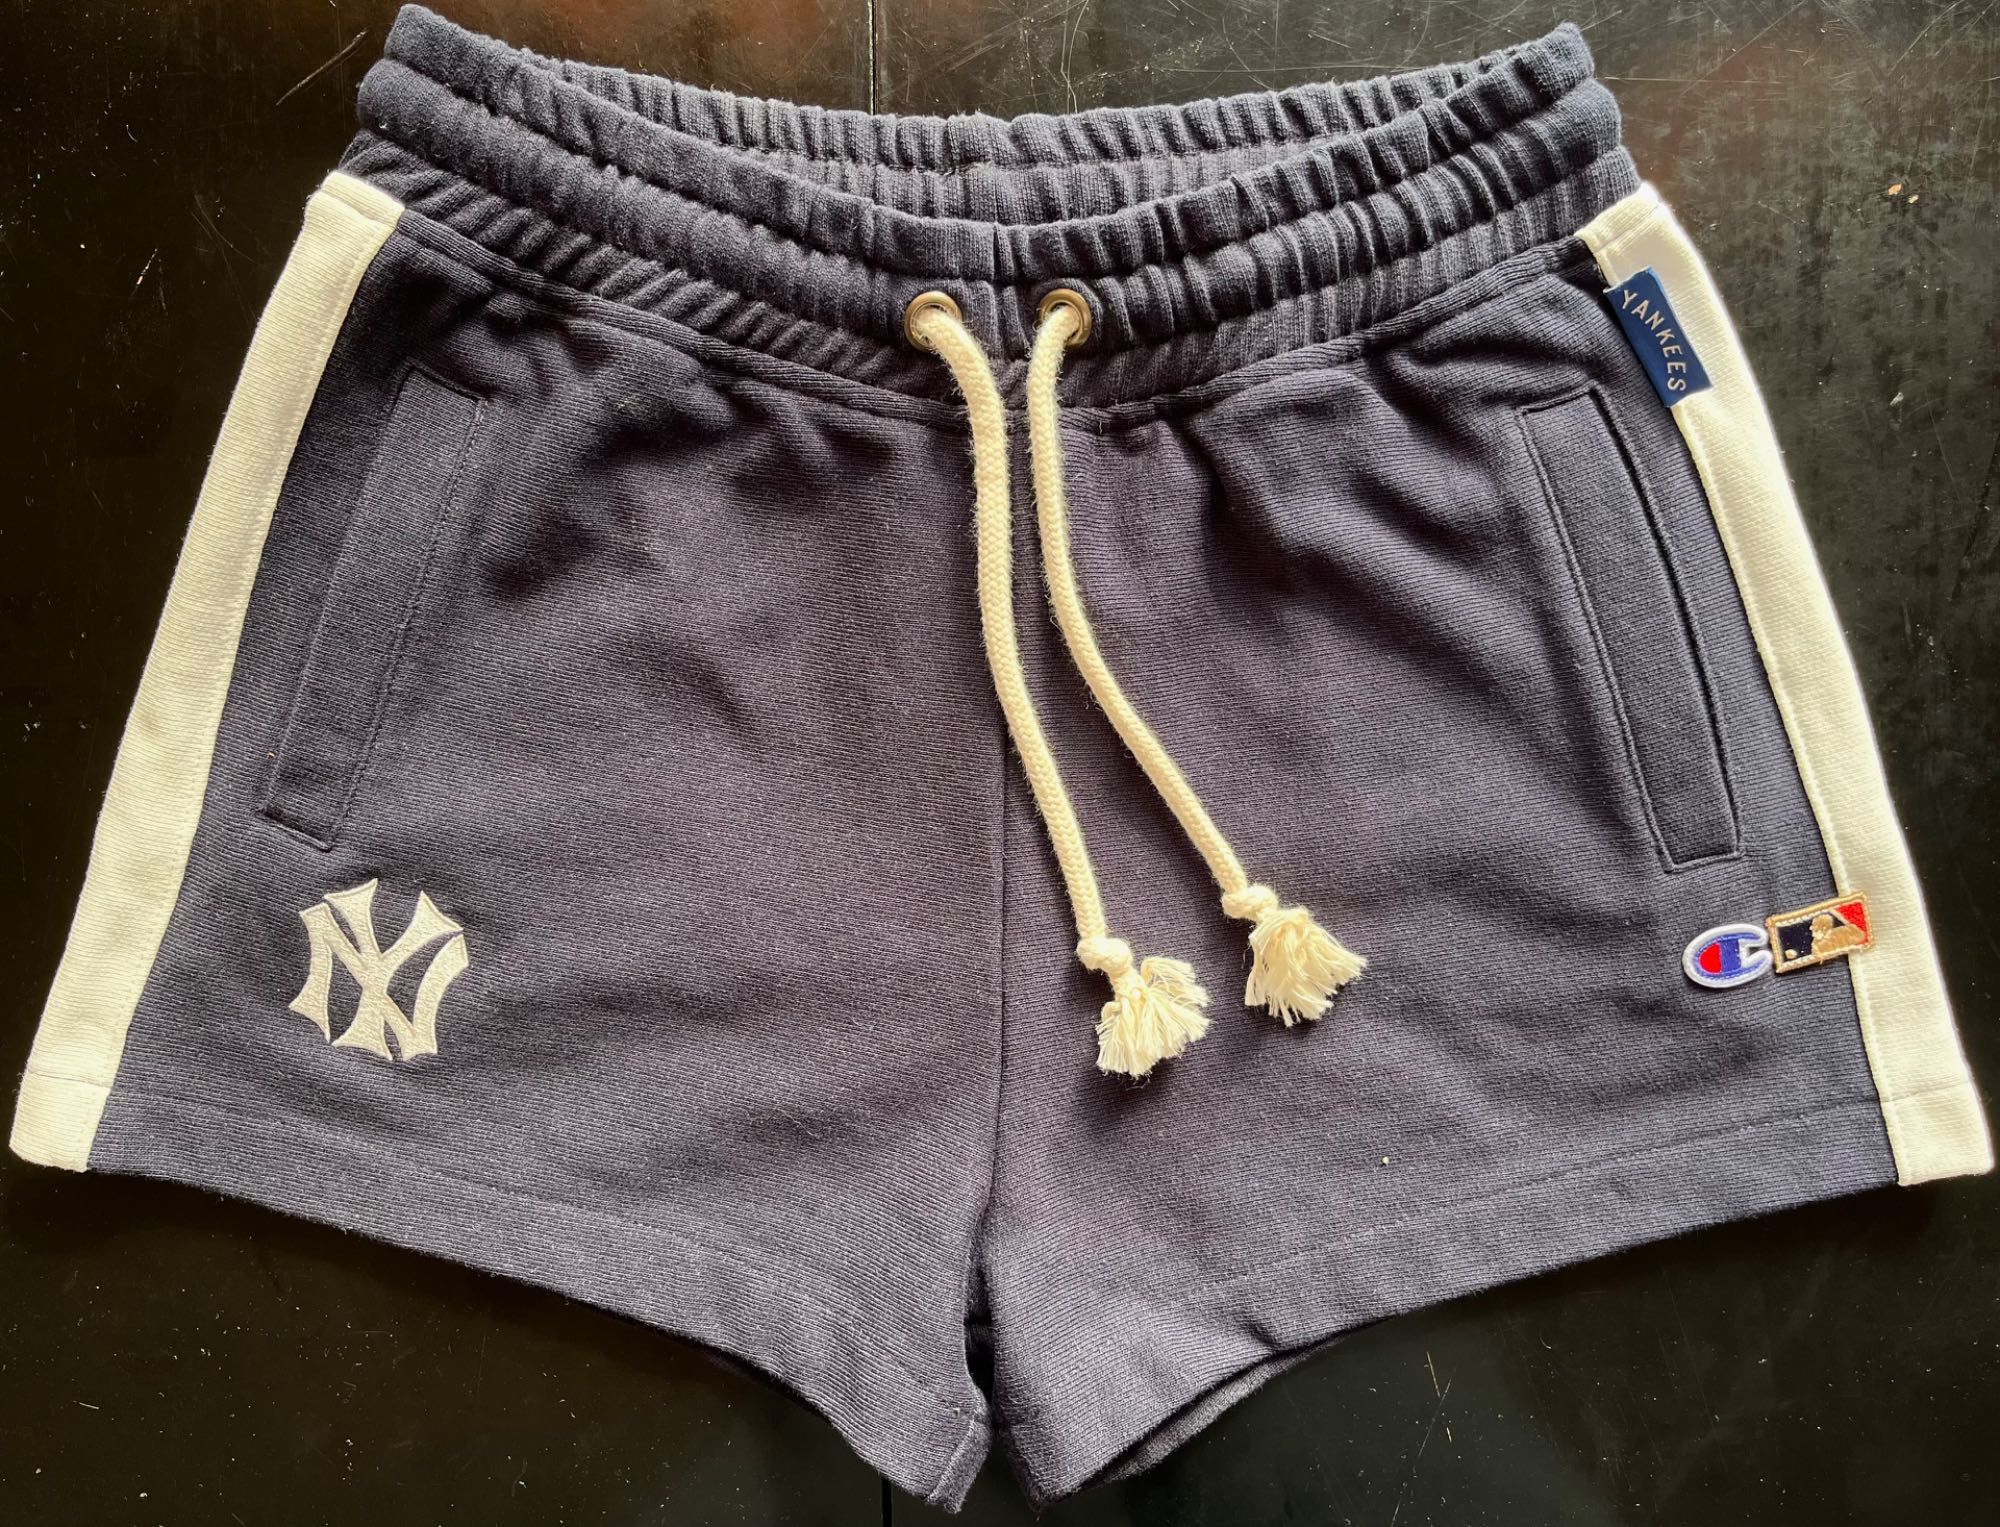 Szorty sportowe Champion New York Yankees Cooperstown Collection